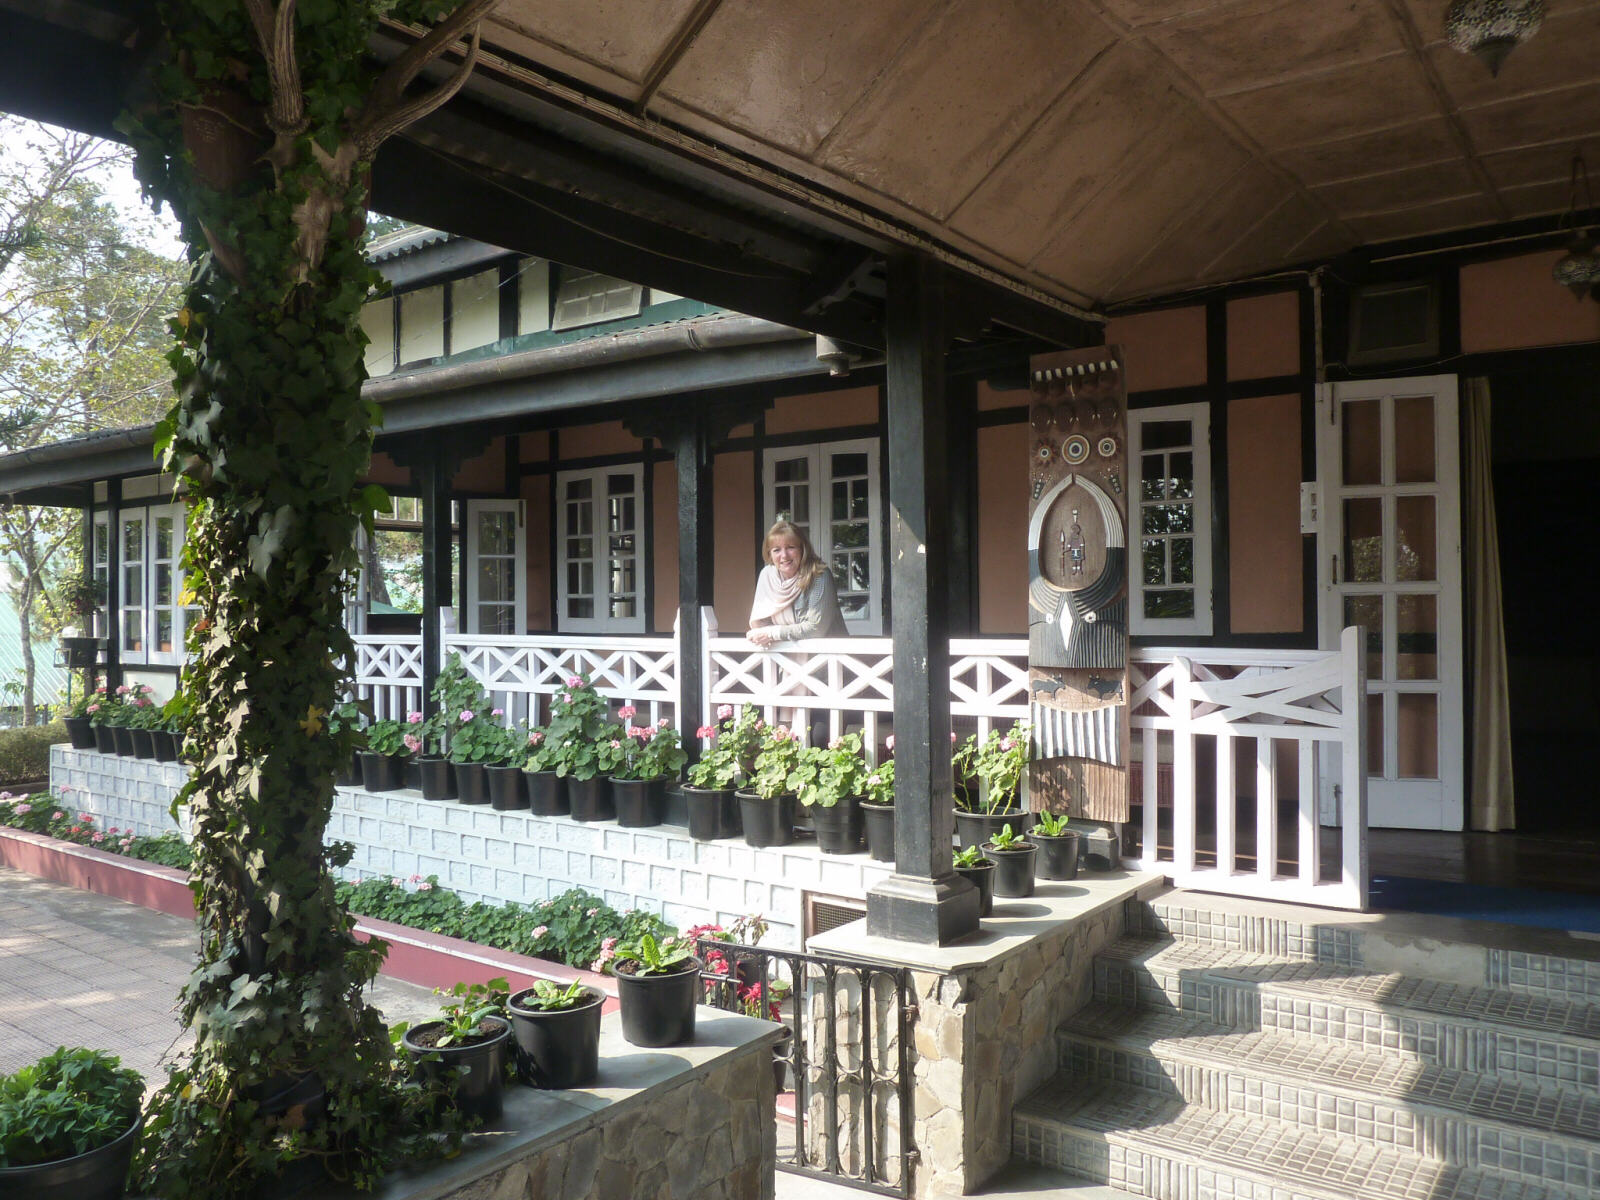 The Heritage Hotel in Kohima, Nagaland state, India